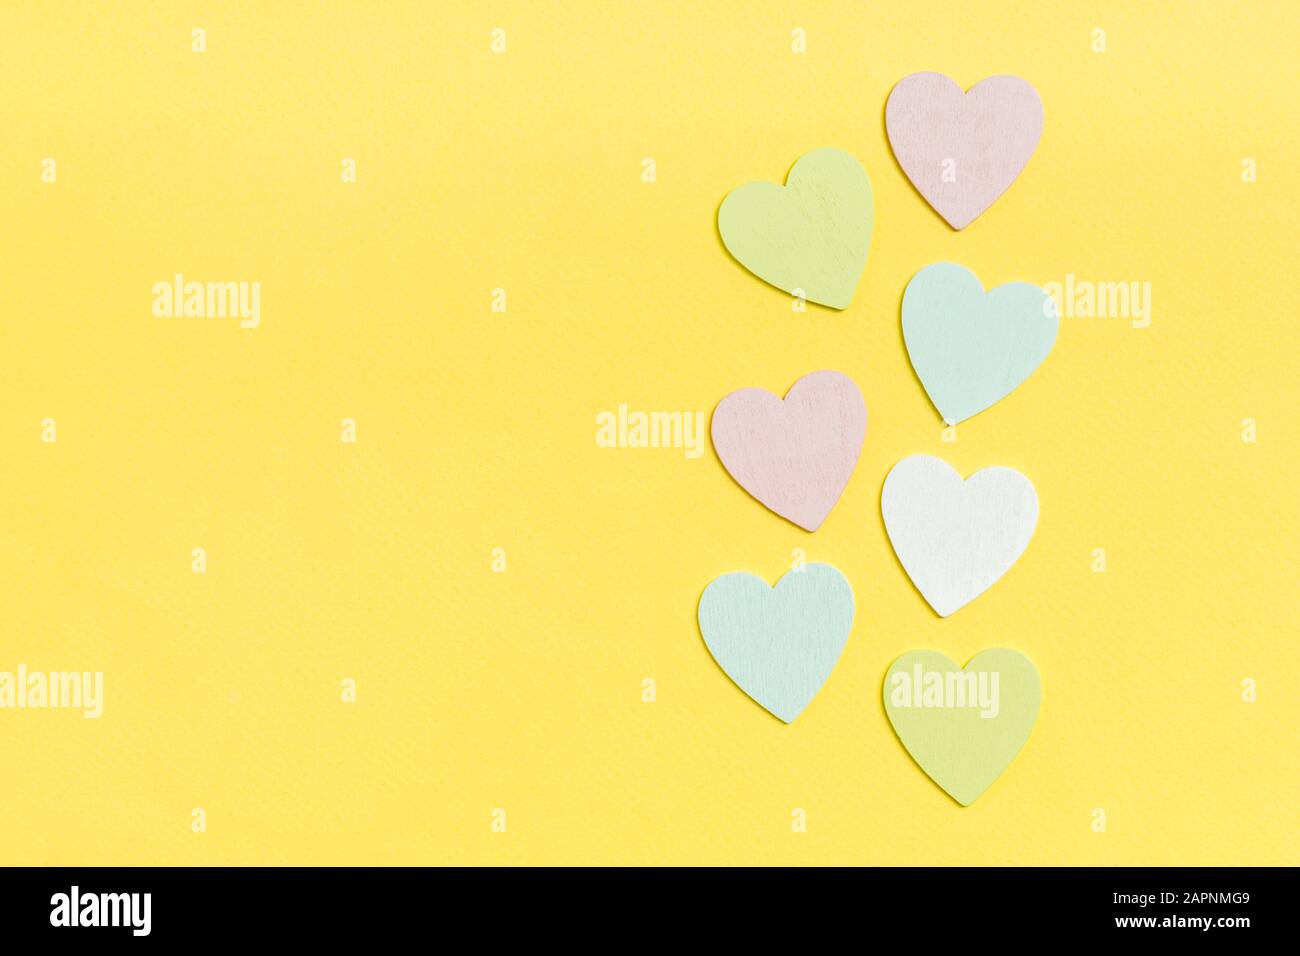 Top view composition of wooden hearts on colorful background. Romantic relationship concept. Valentaine's Day. Stock Photo